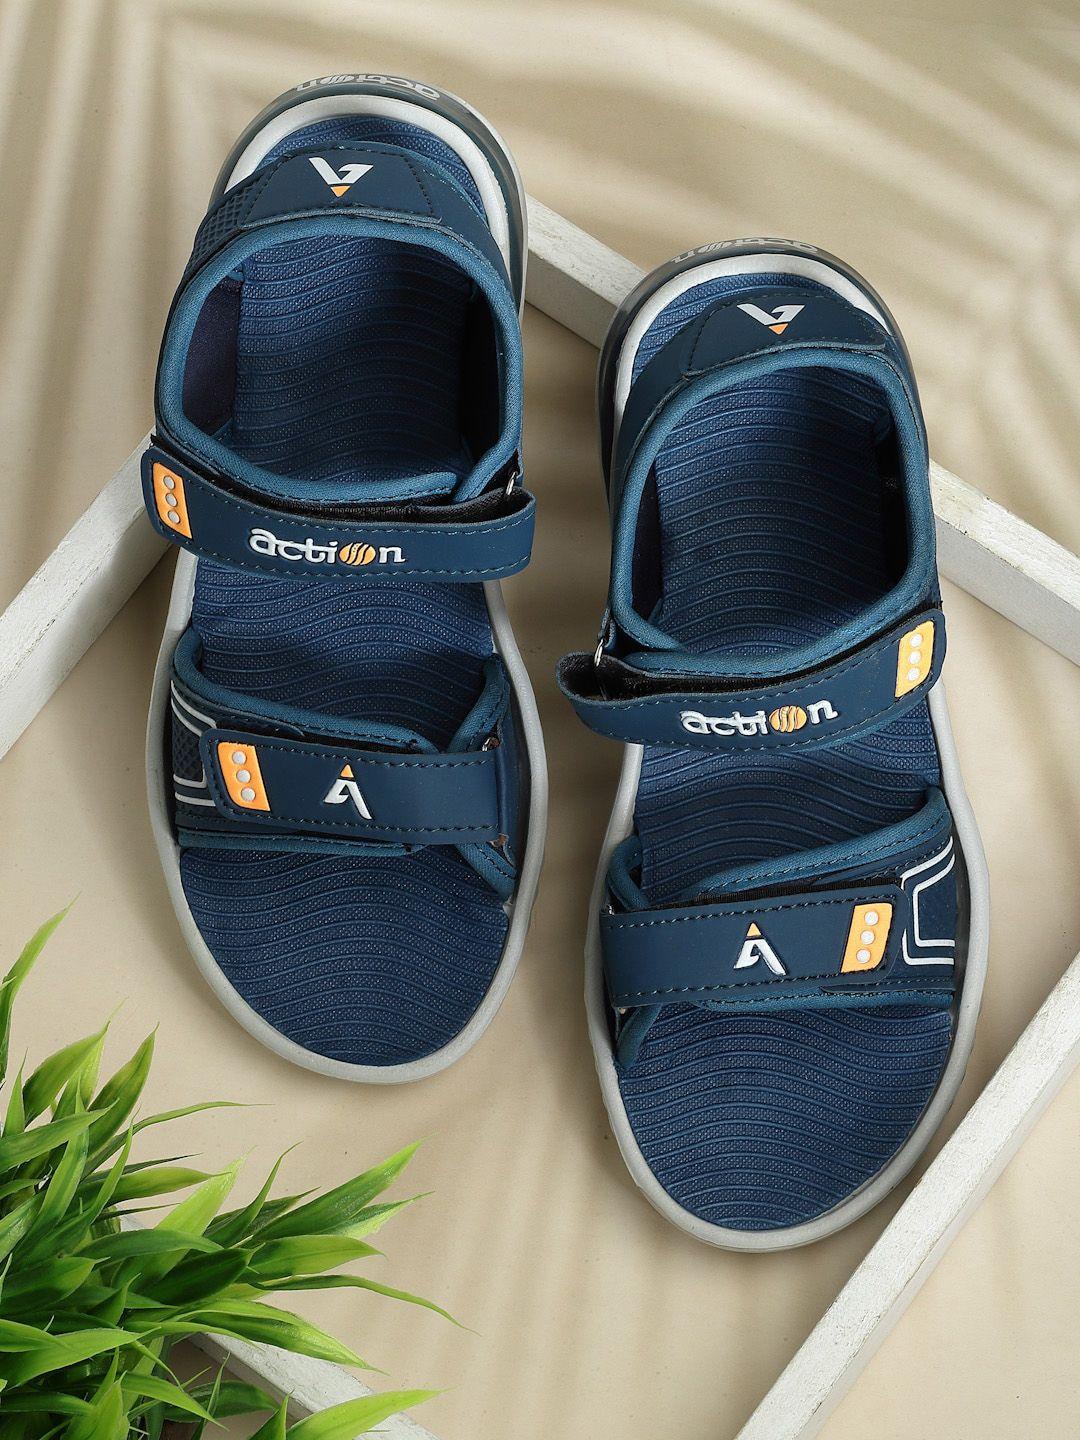 action men lightweight sports sandals with velcro